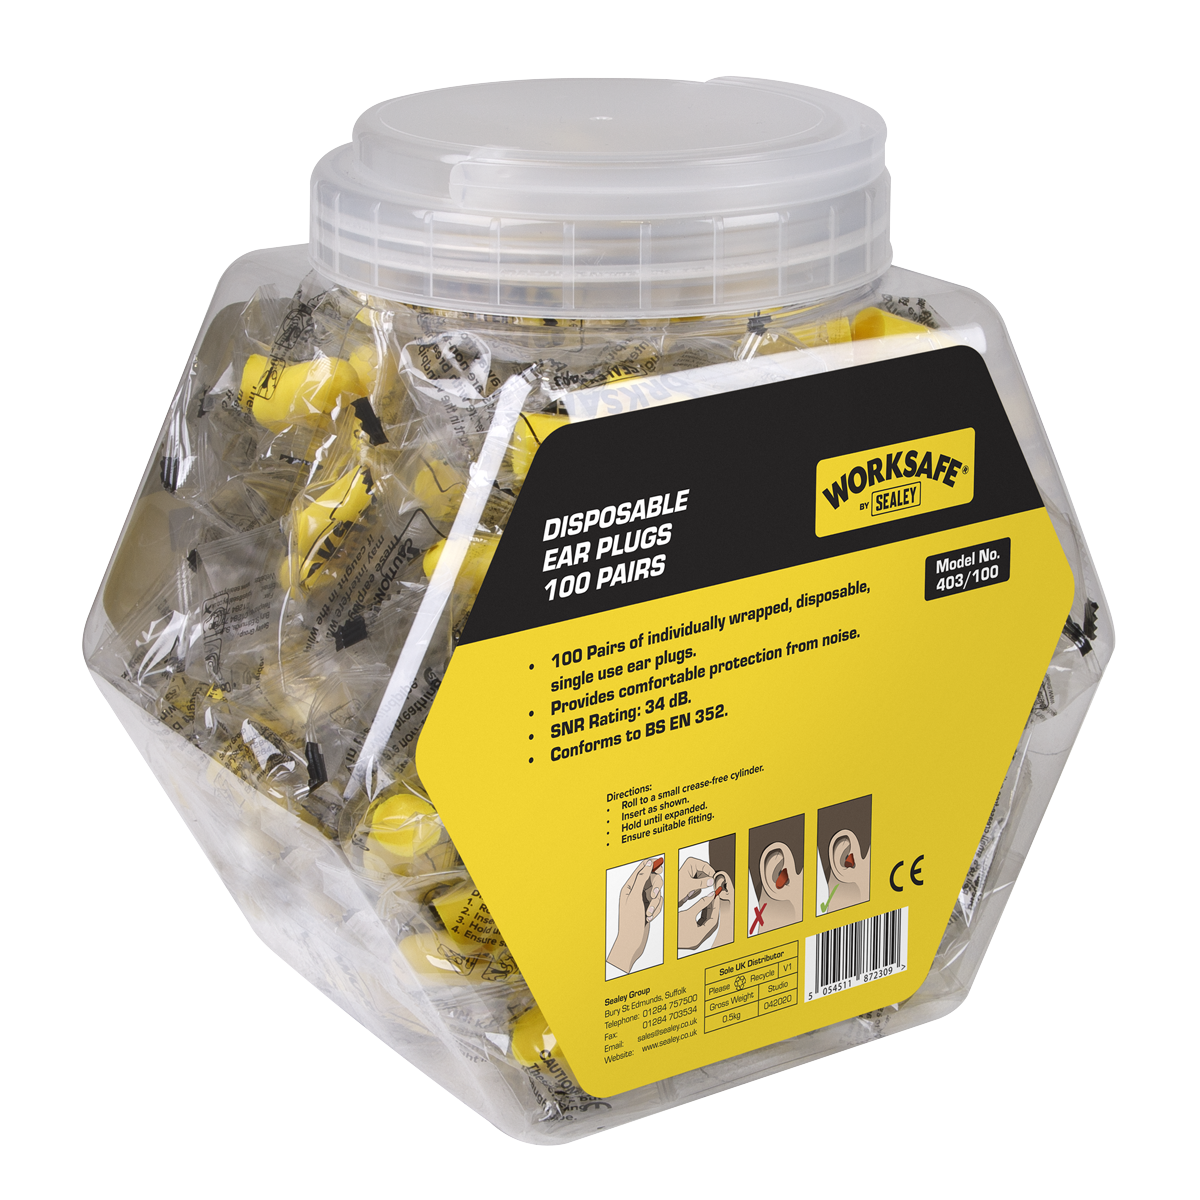 Ear Plugs Disposable - 100 Pairs - 403/100 - Farming Parts